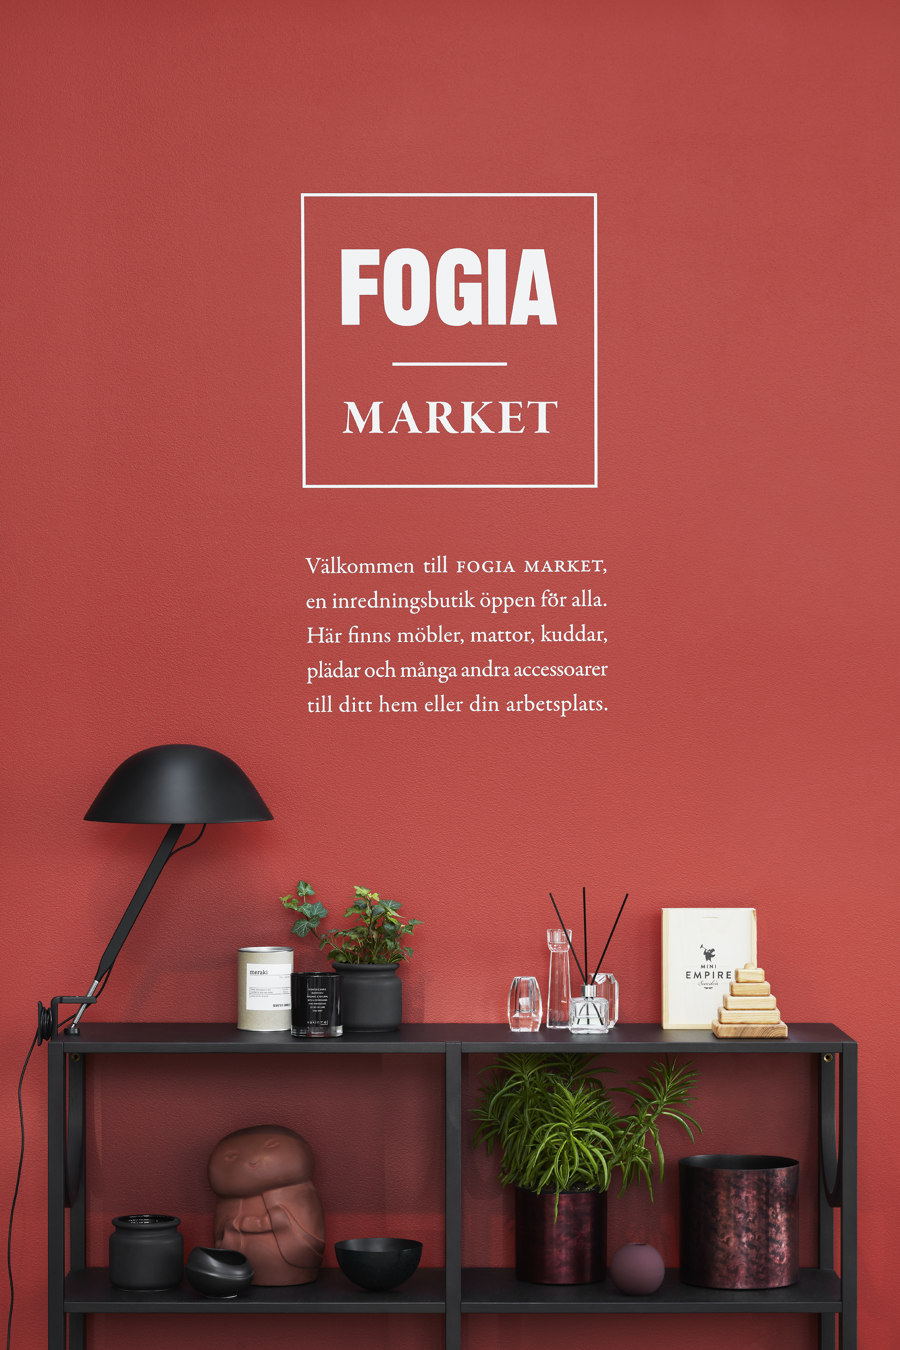 Fogia's showroom by Code Concept | Showrooms